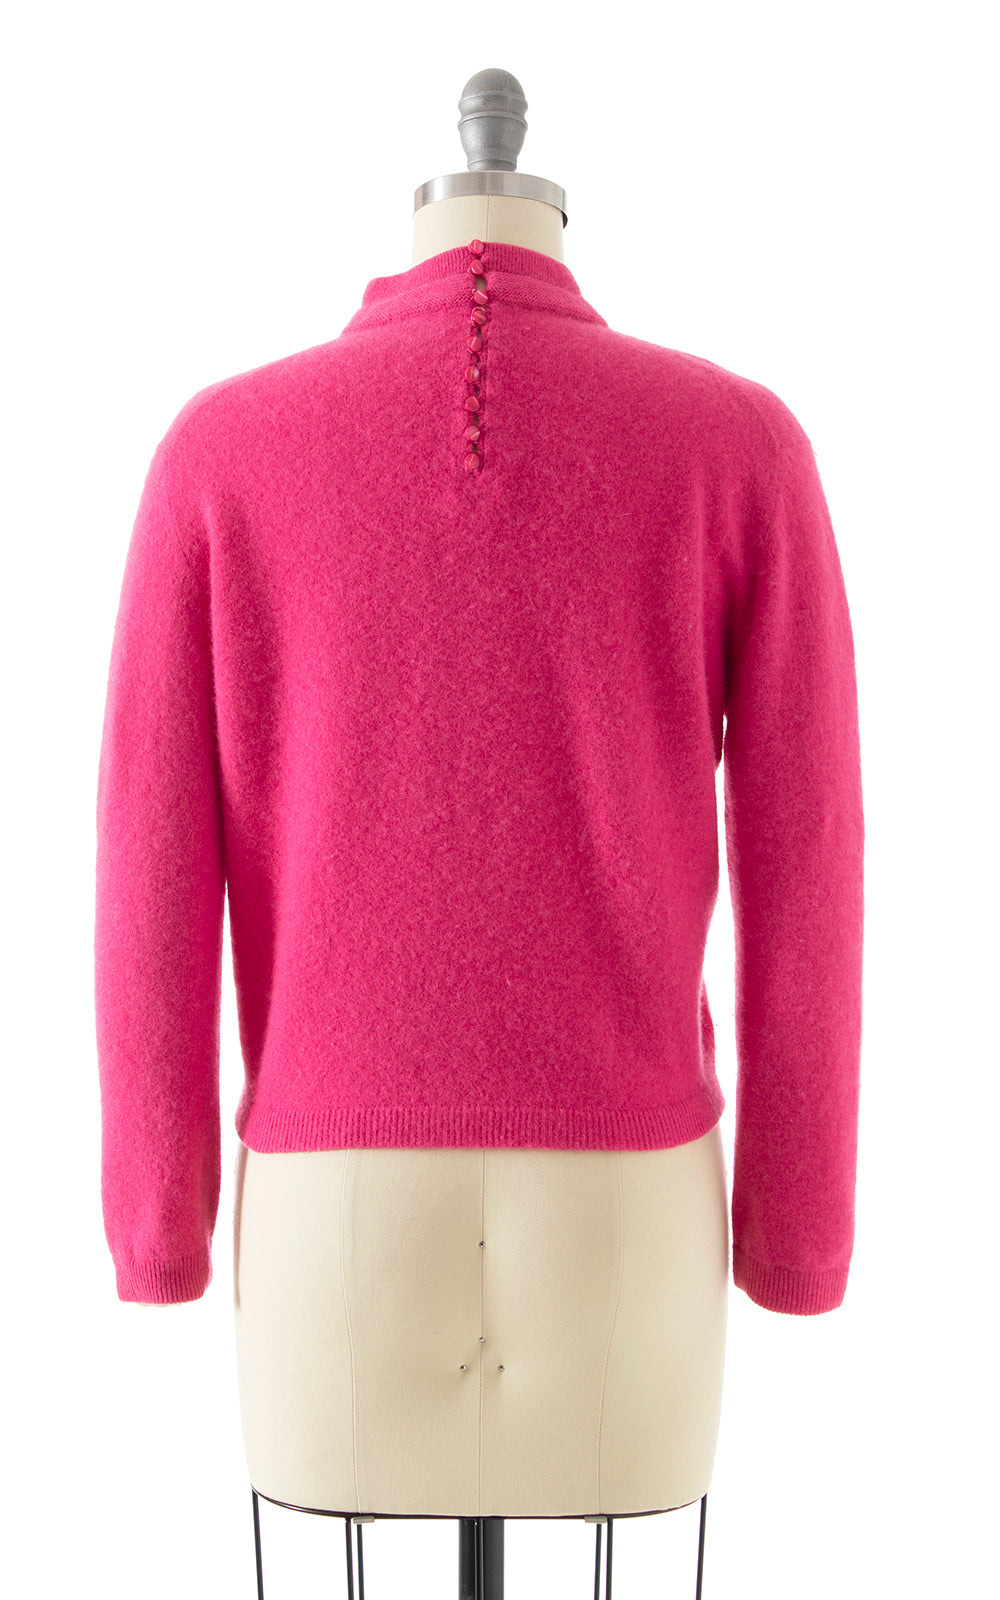 Vintage 1950s Hot Pink Knit Wool Angora Pullover Sweater Top  Birthday Life Vintage